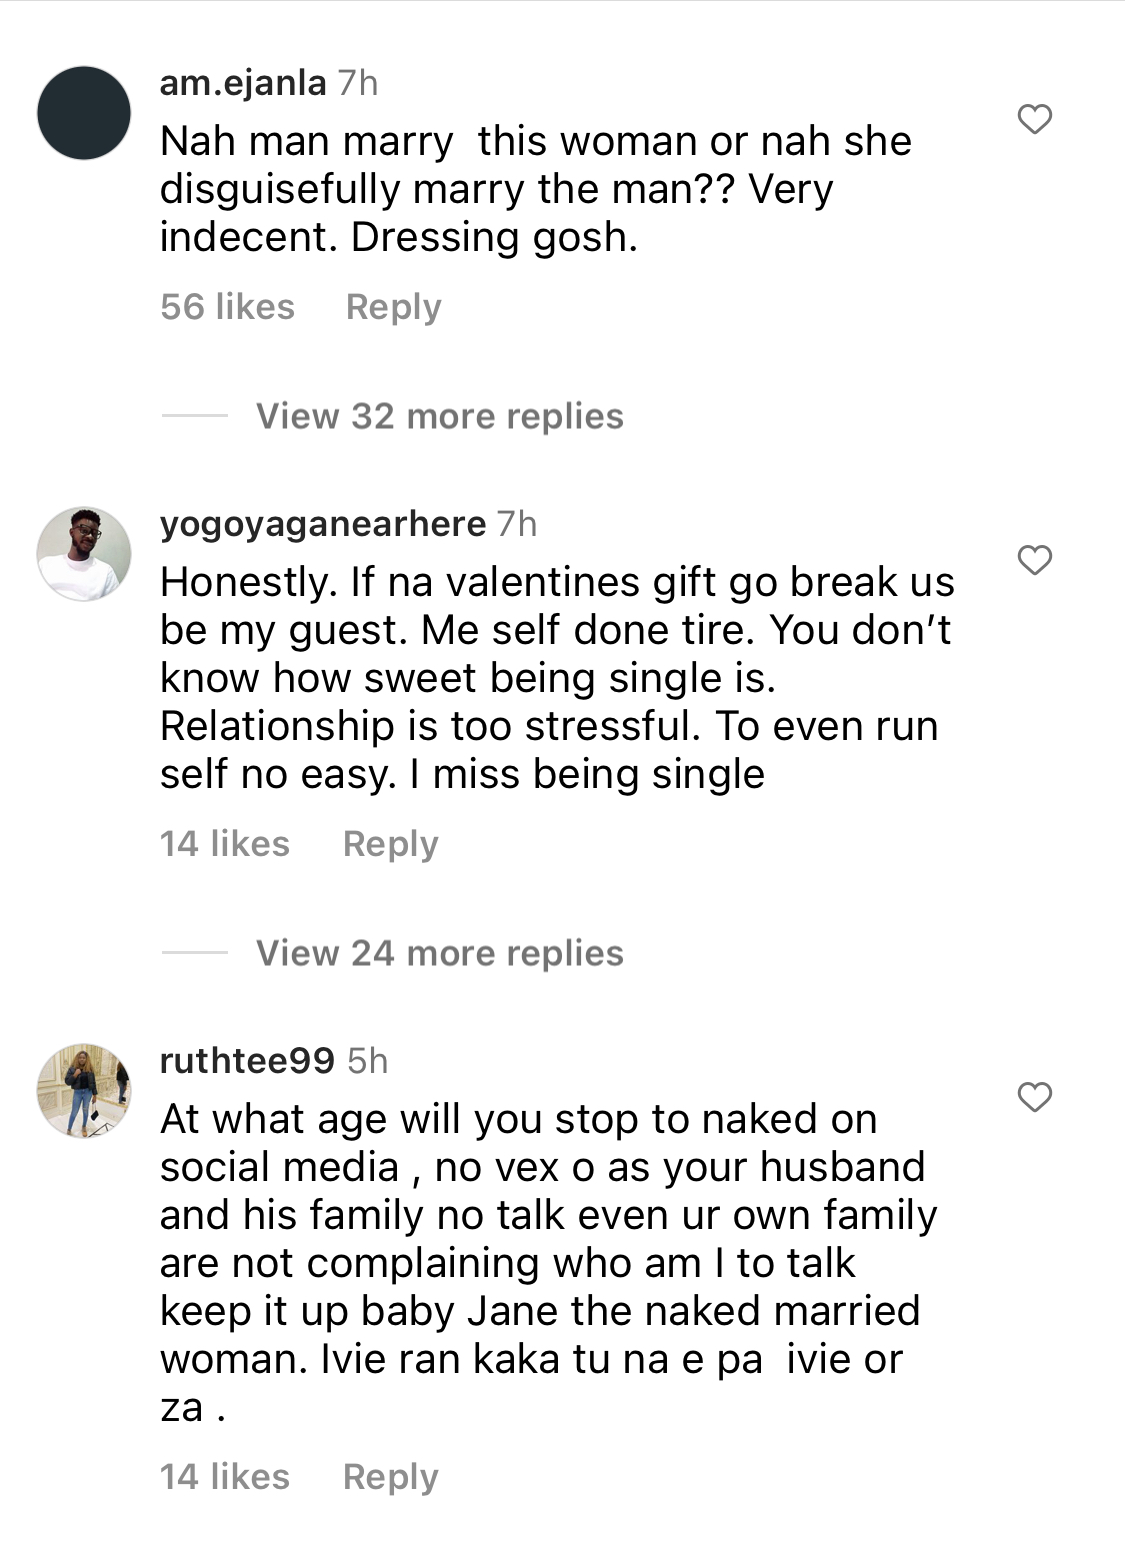 If he loves you, he won’t get you a Valentine’s gift - Dance Janemena tells ladies